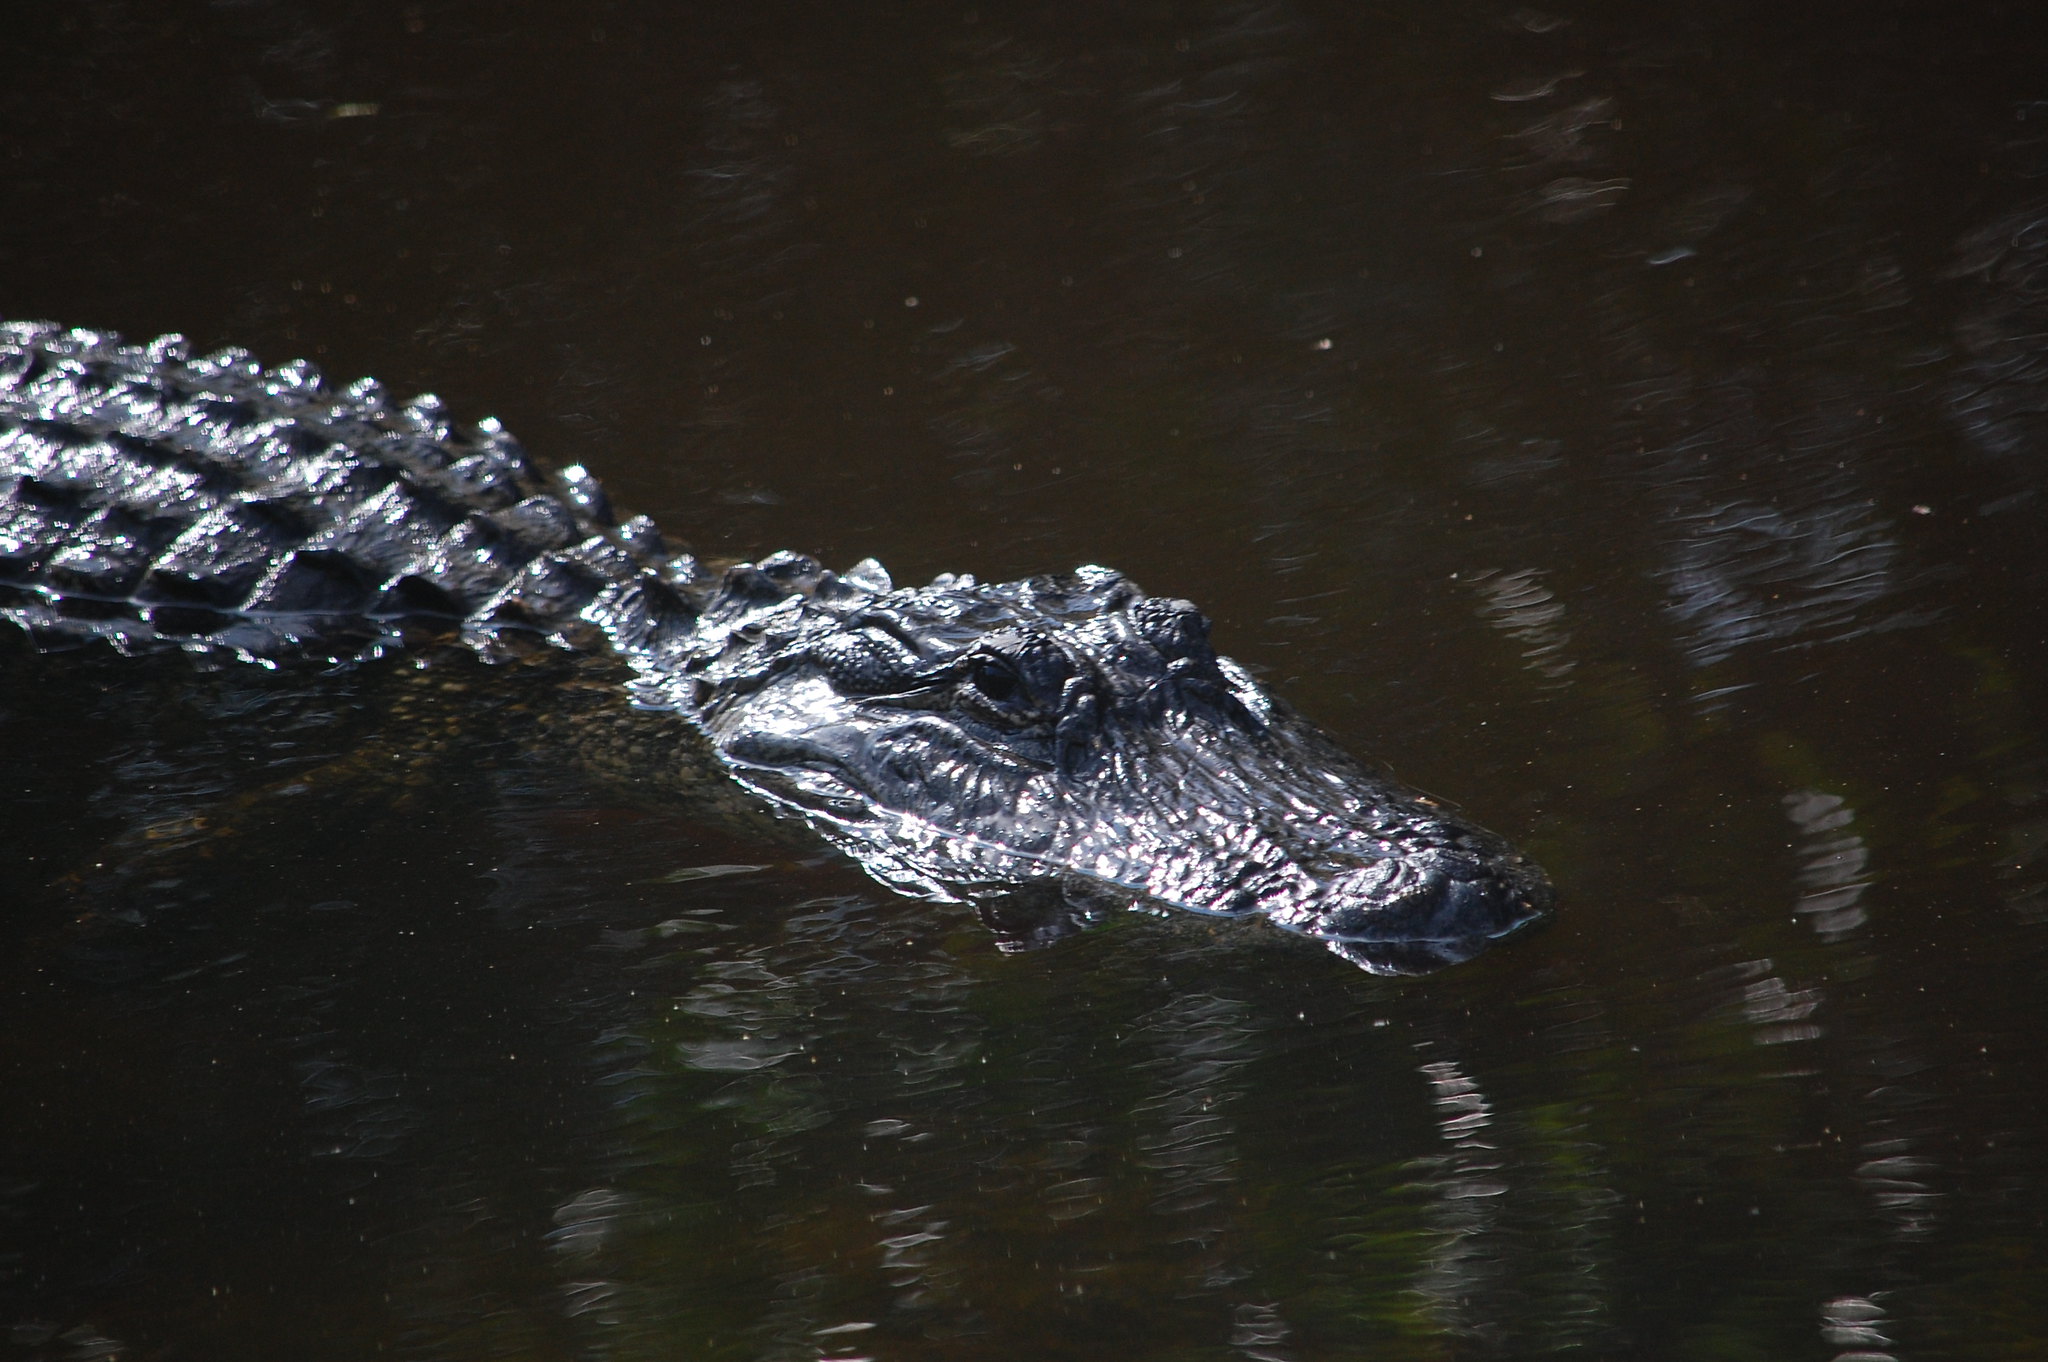 Florida Man Attacked and Killed by an Alligator While Collecting Frisbees in a Public Lake